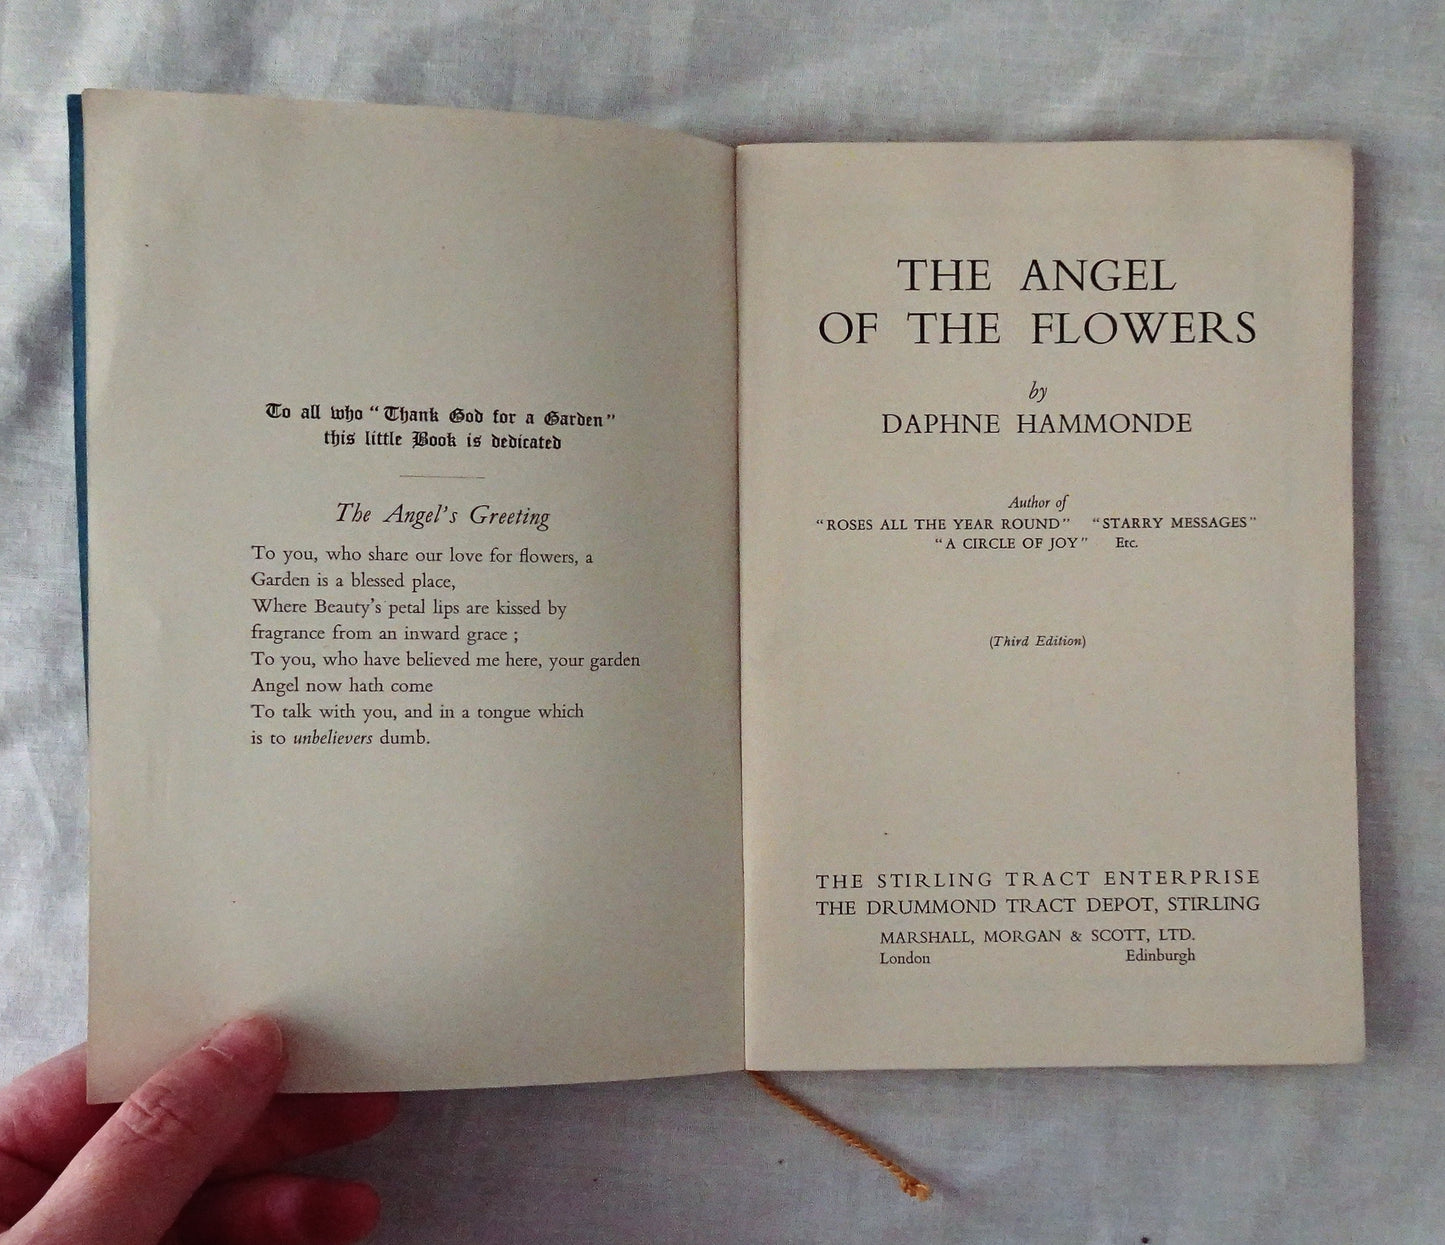 The Angel of the Flowers by Daphne Hammonde